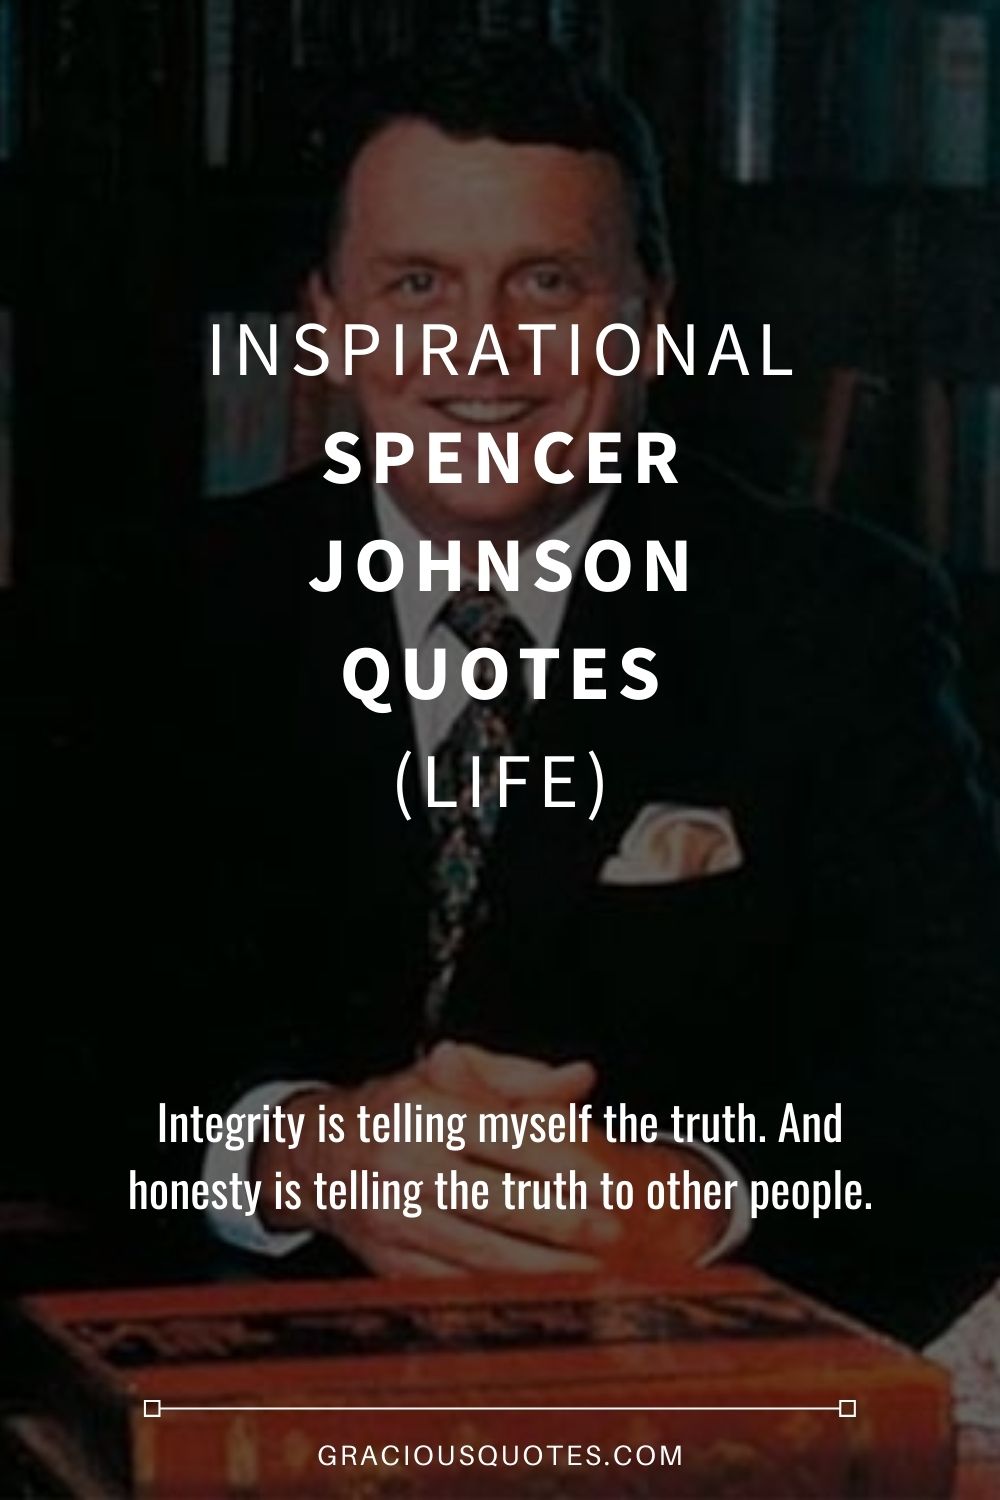 Inspirational Spencer Johnson Quotes (LIFE) - Gracious Quotes